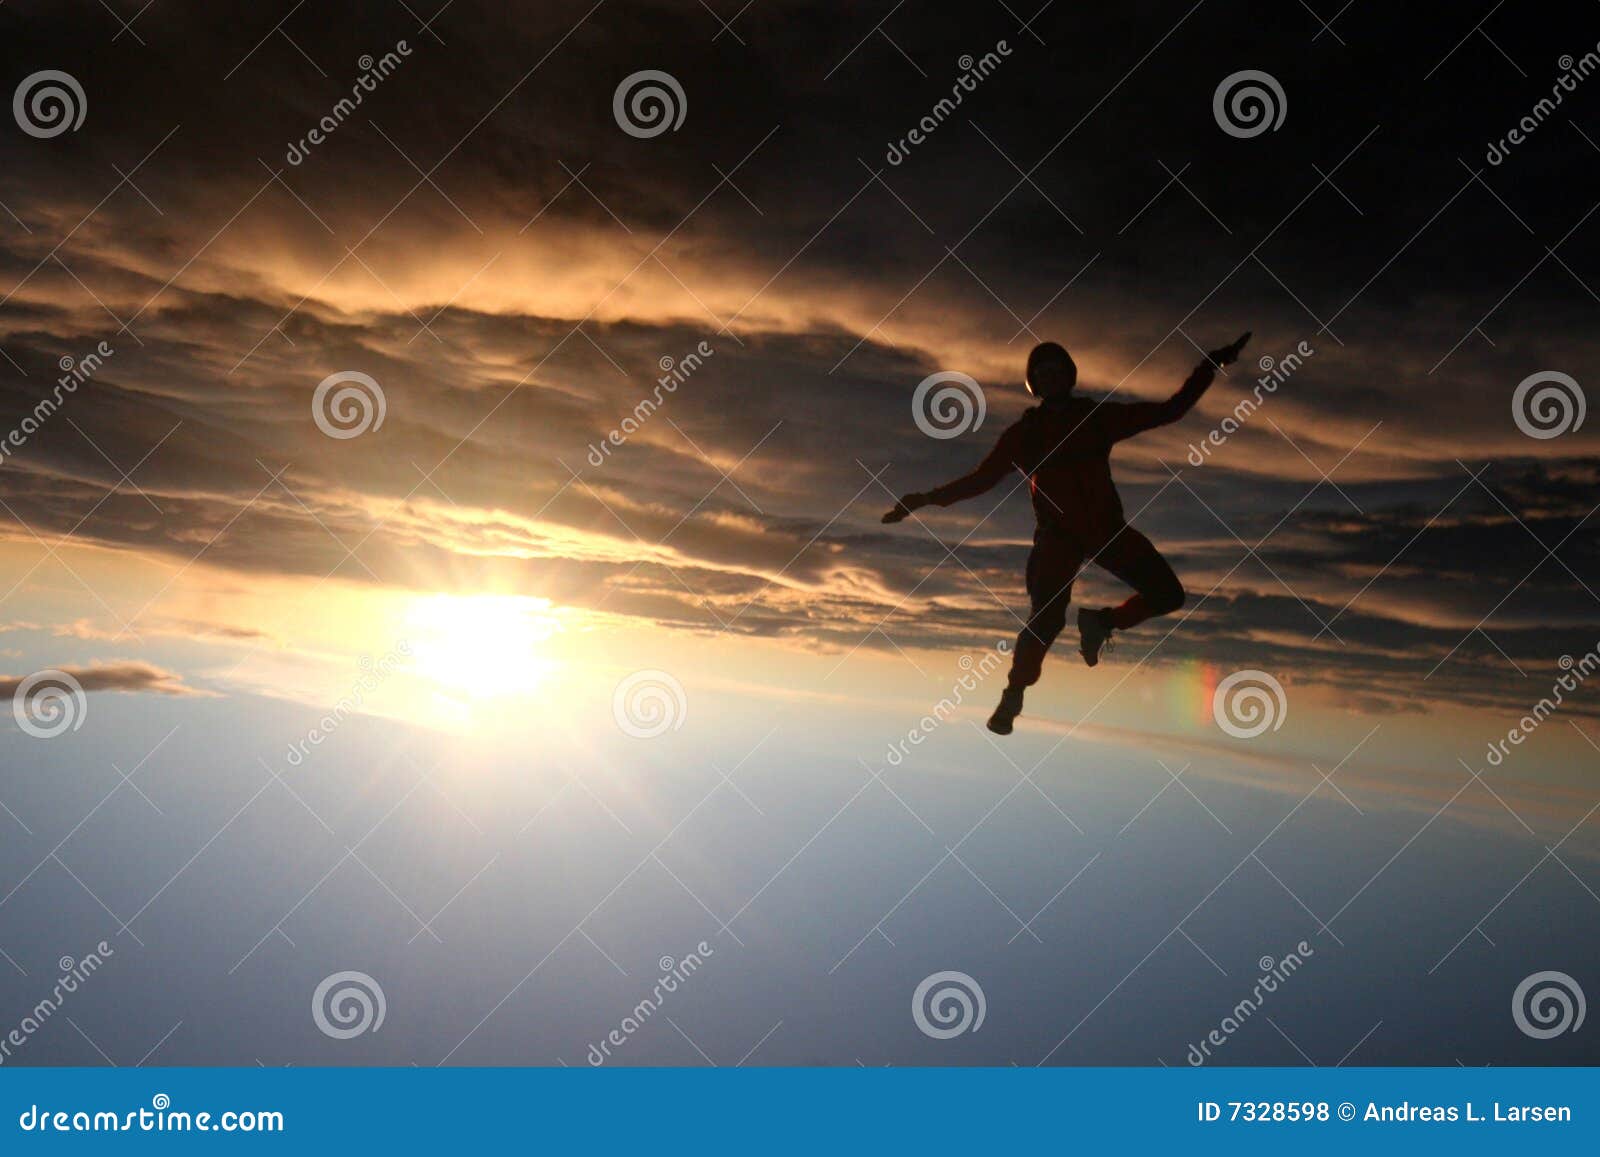 silhouette of a skydiver